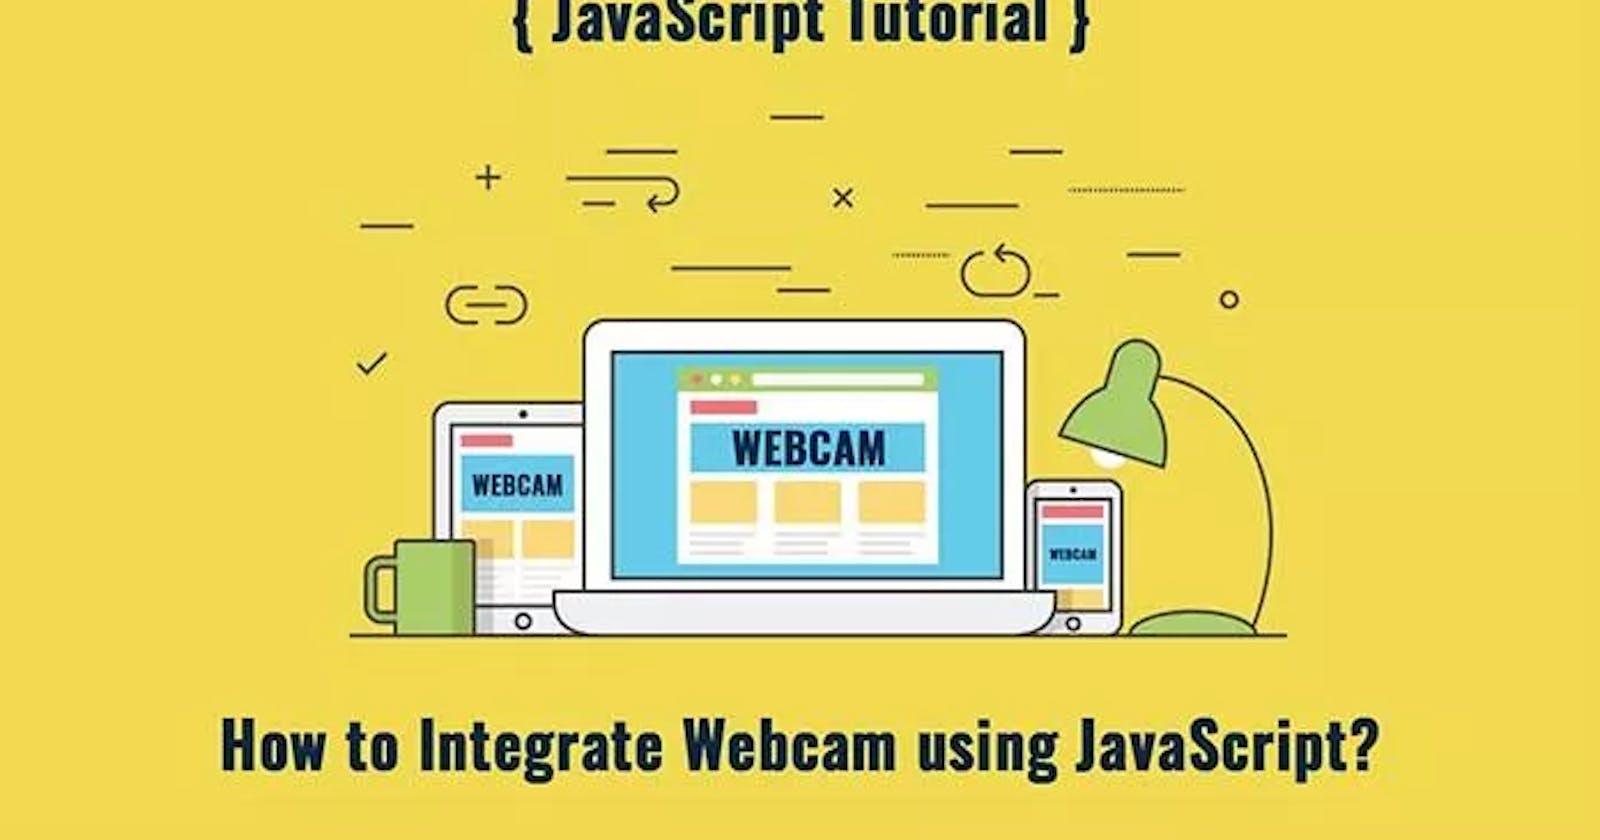 How to Integrate Webcam using JavaScript